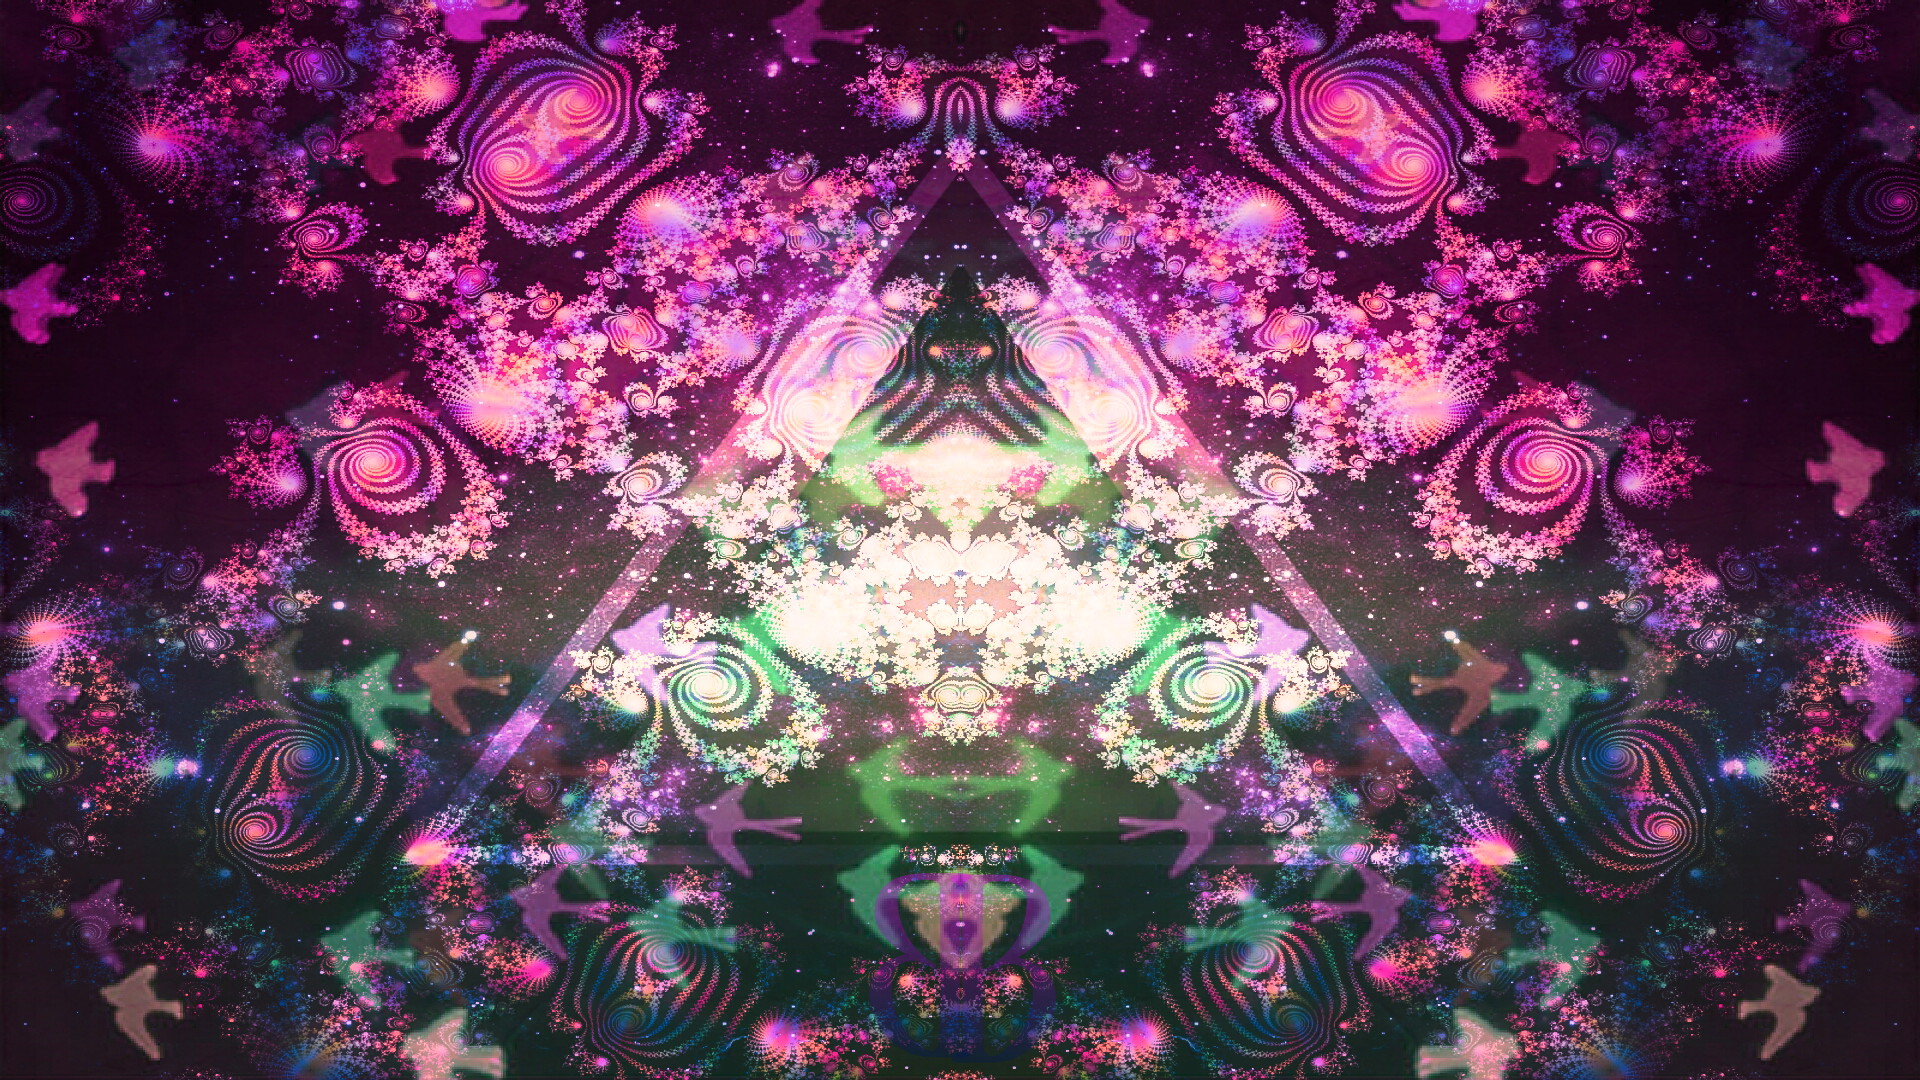 Psychedelic 1920x1080